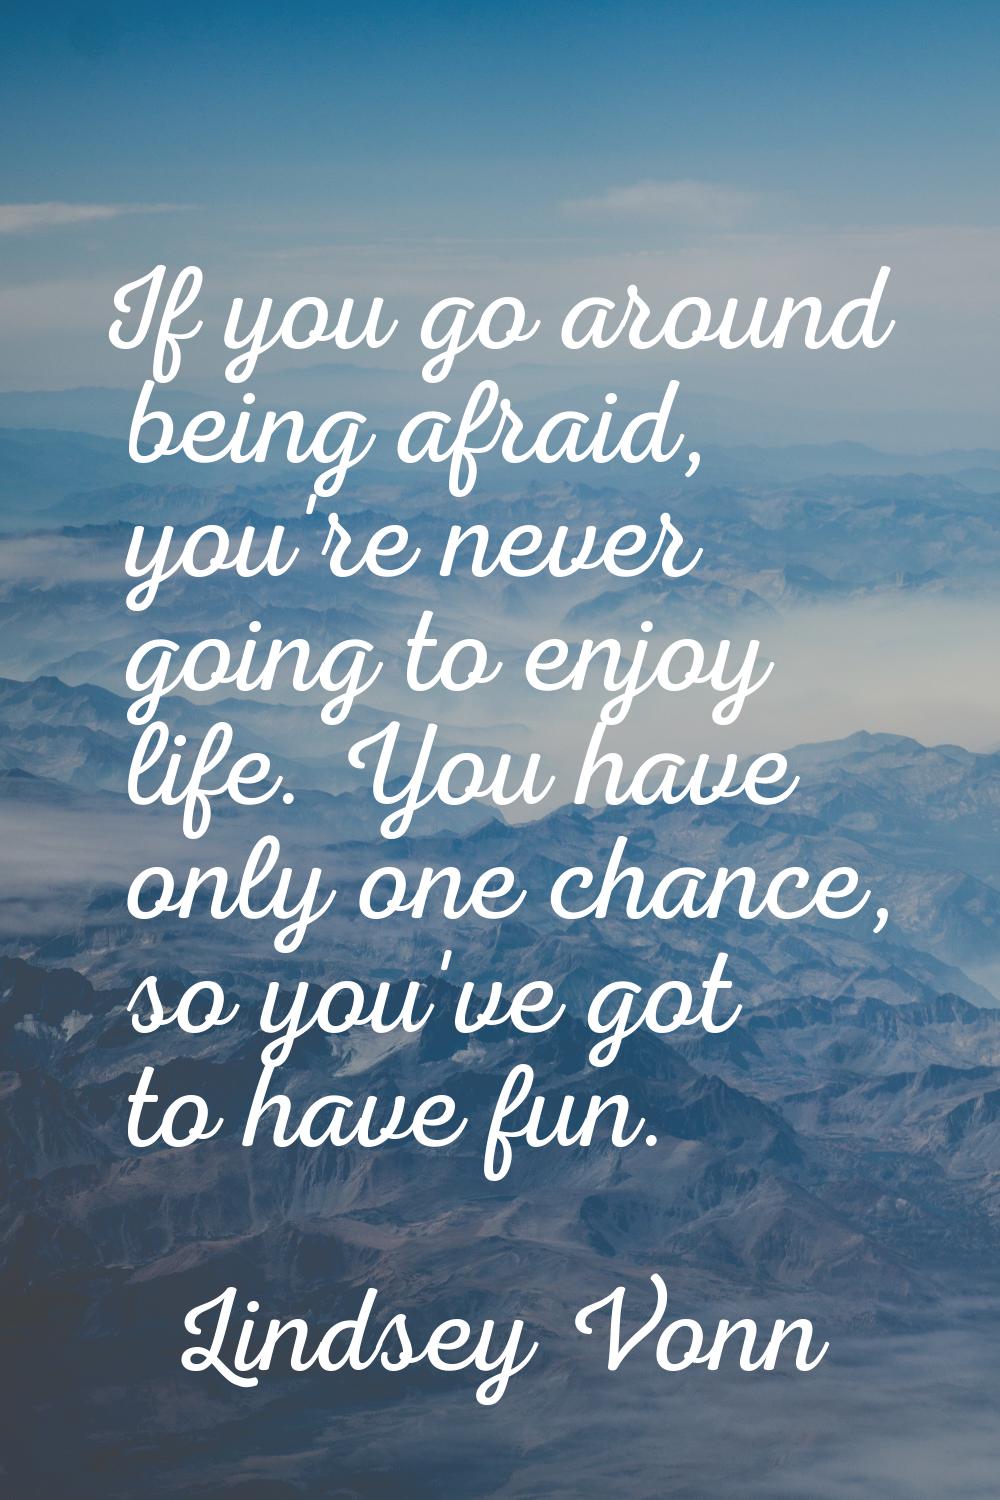 If you go around being afraid, you're never going to enjoy life. You have only one chance, so you'v